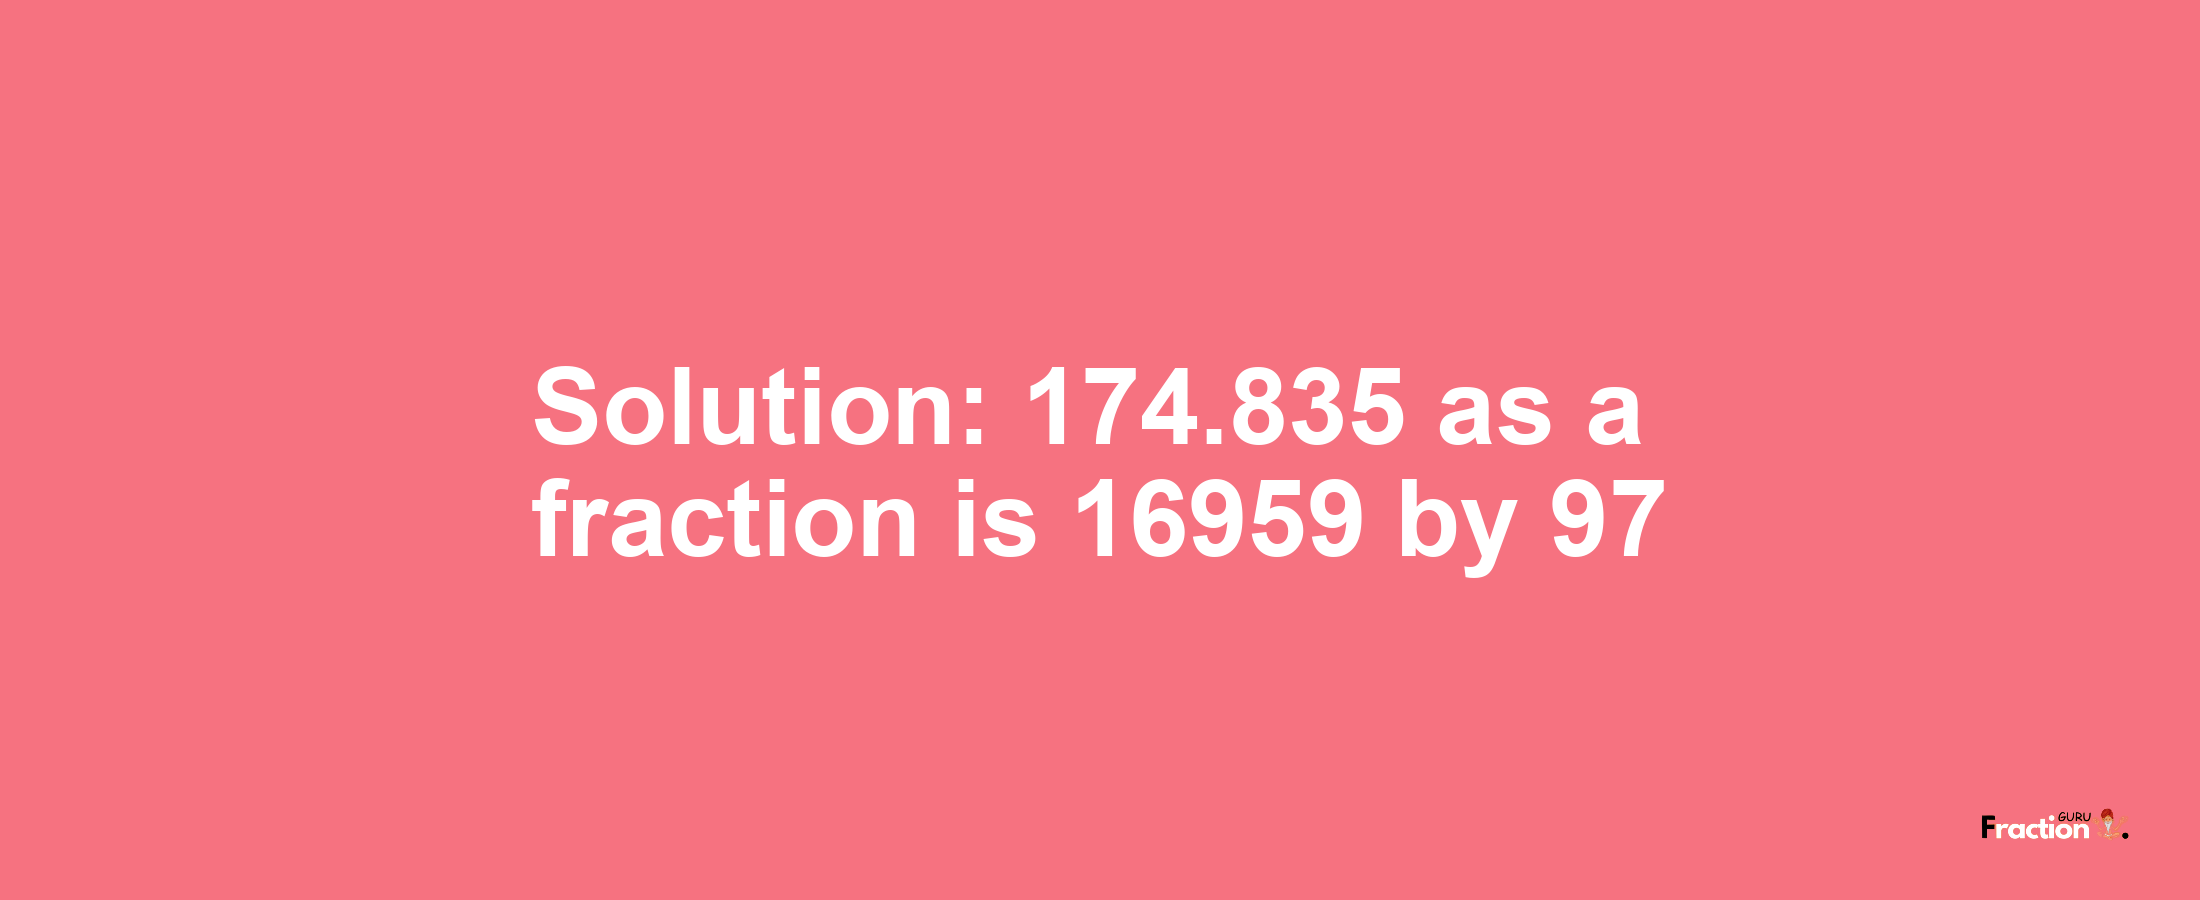 Solution:174.835 as a fraction is 16959/97